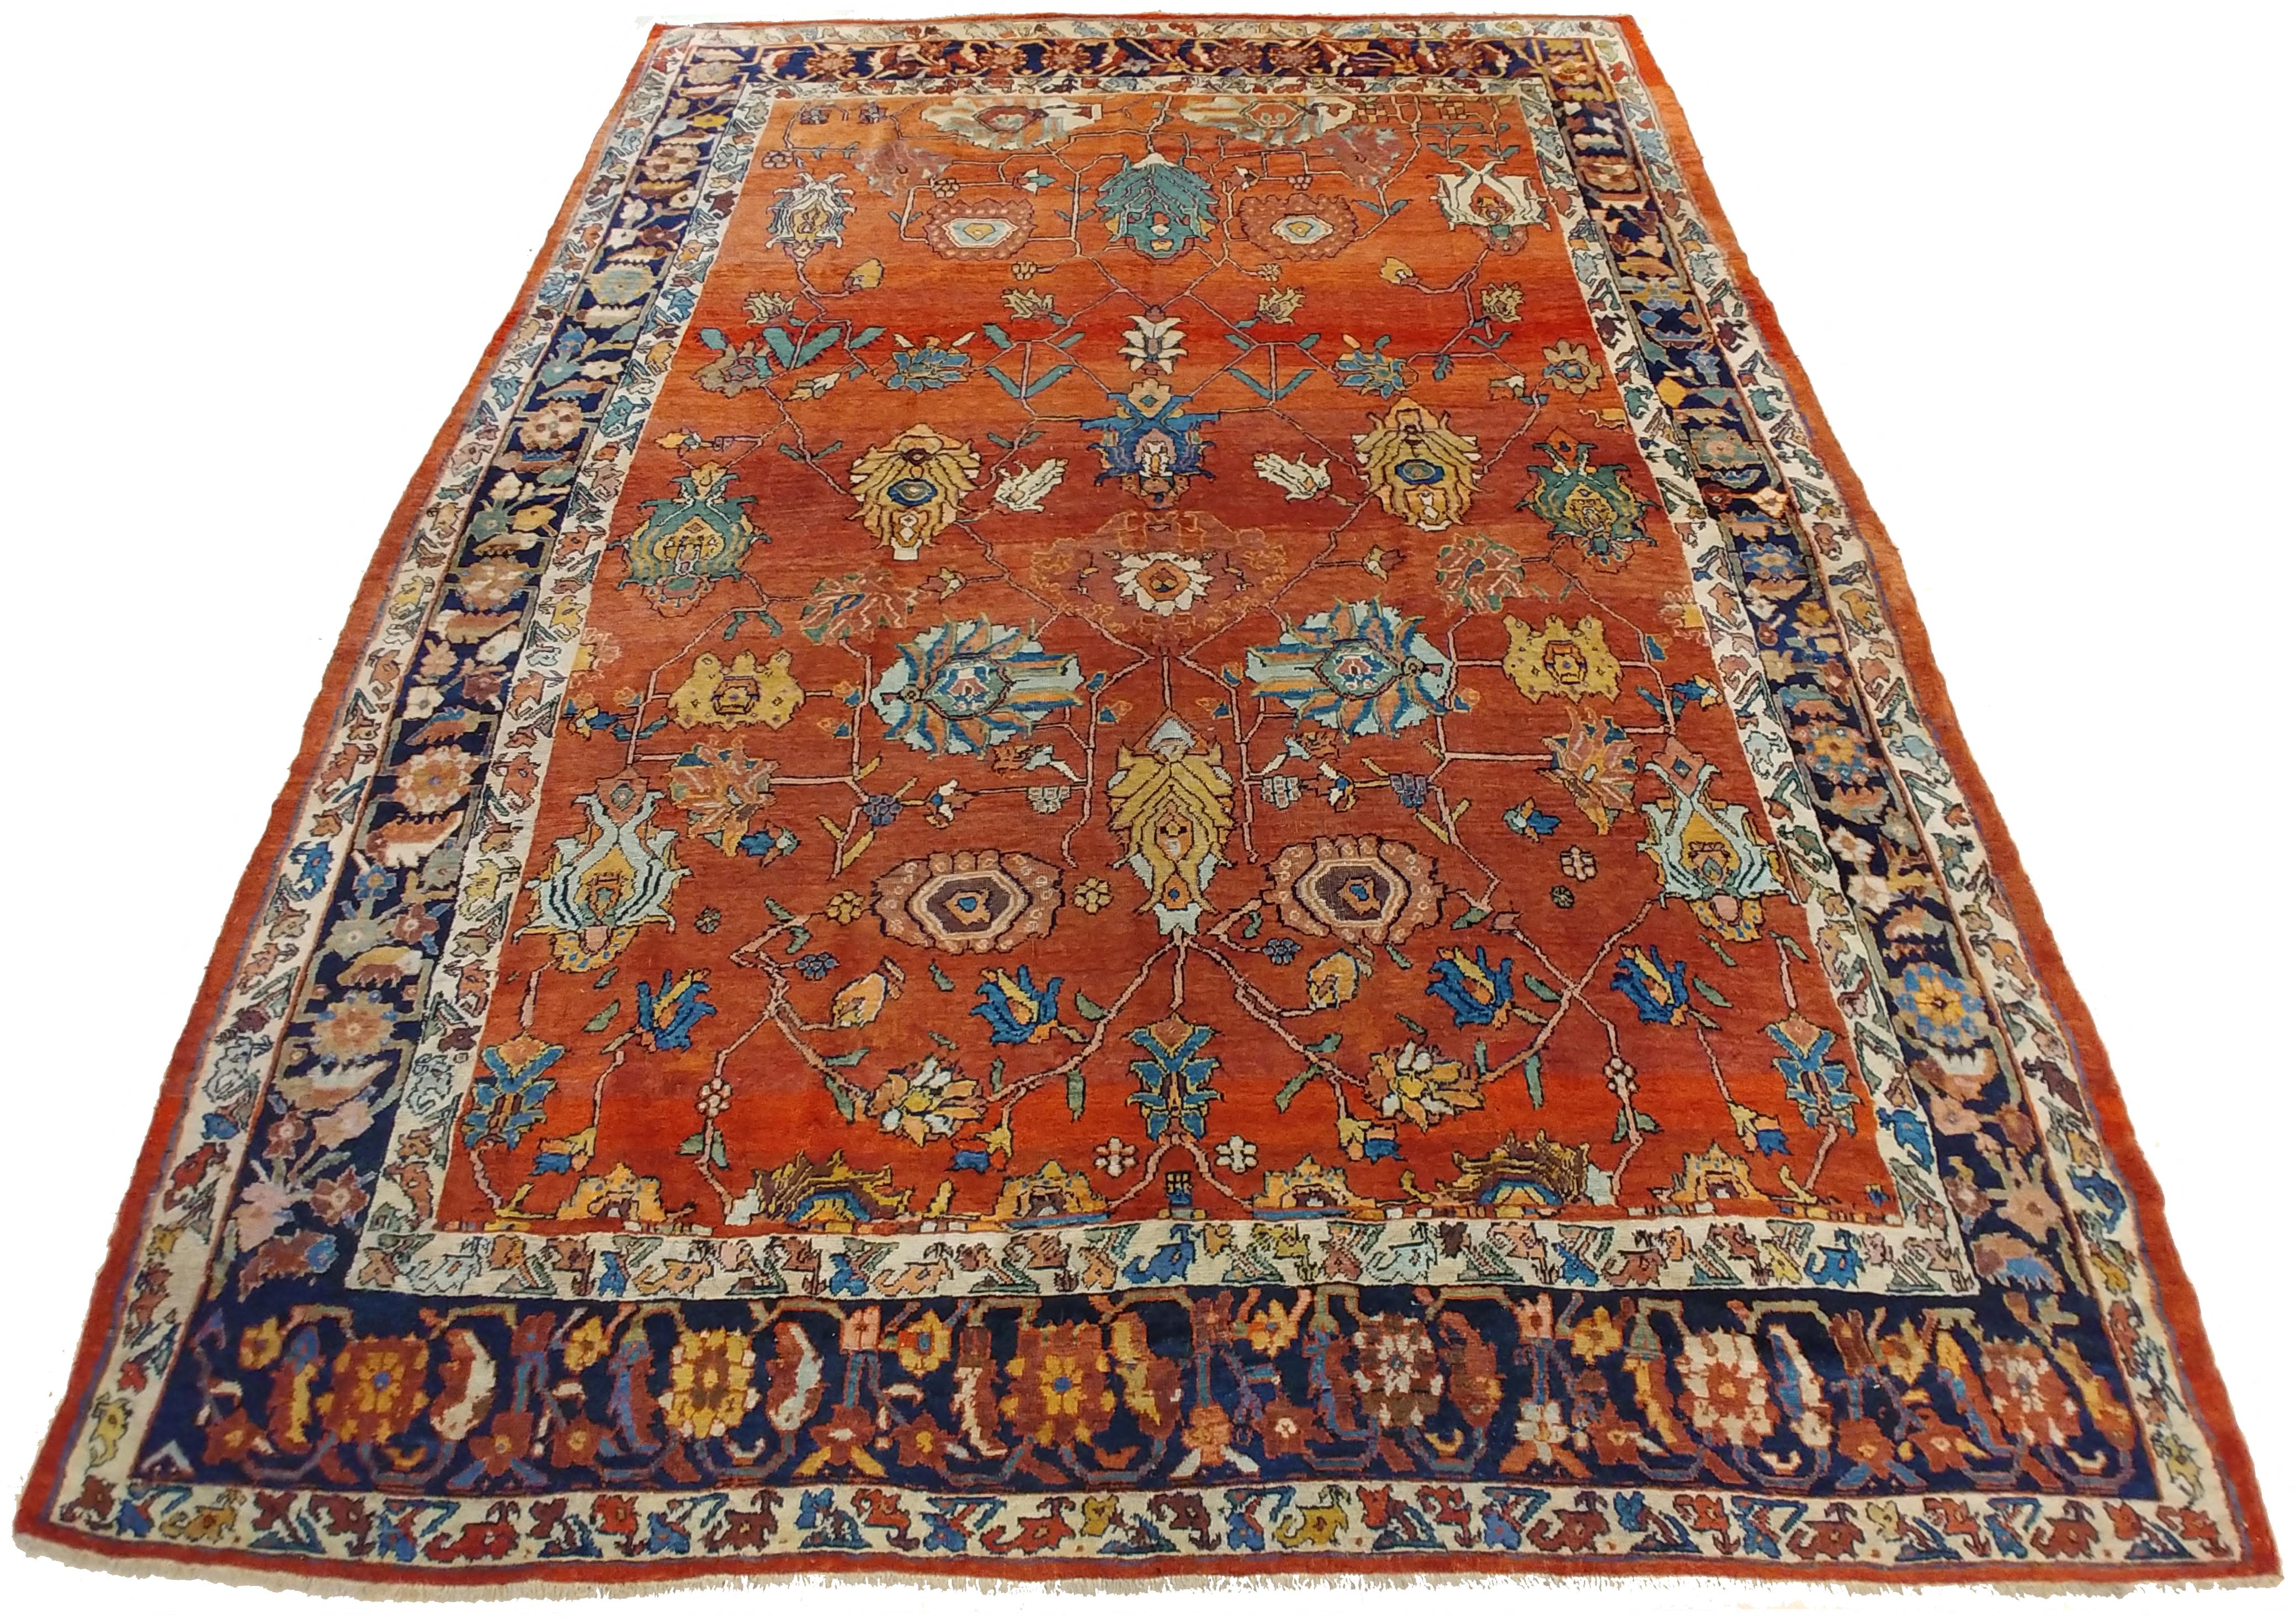 20th Century Antique North West Persian Carpet, Handmade Rust Red, Navy, Wool, Allover Design For Sale